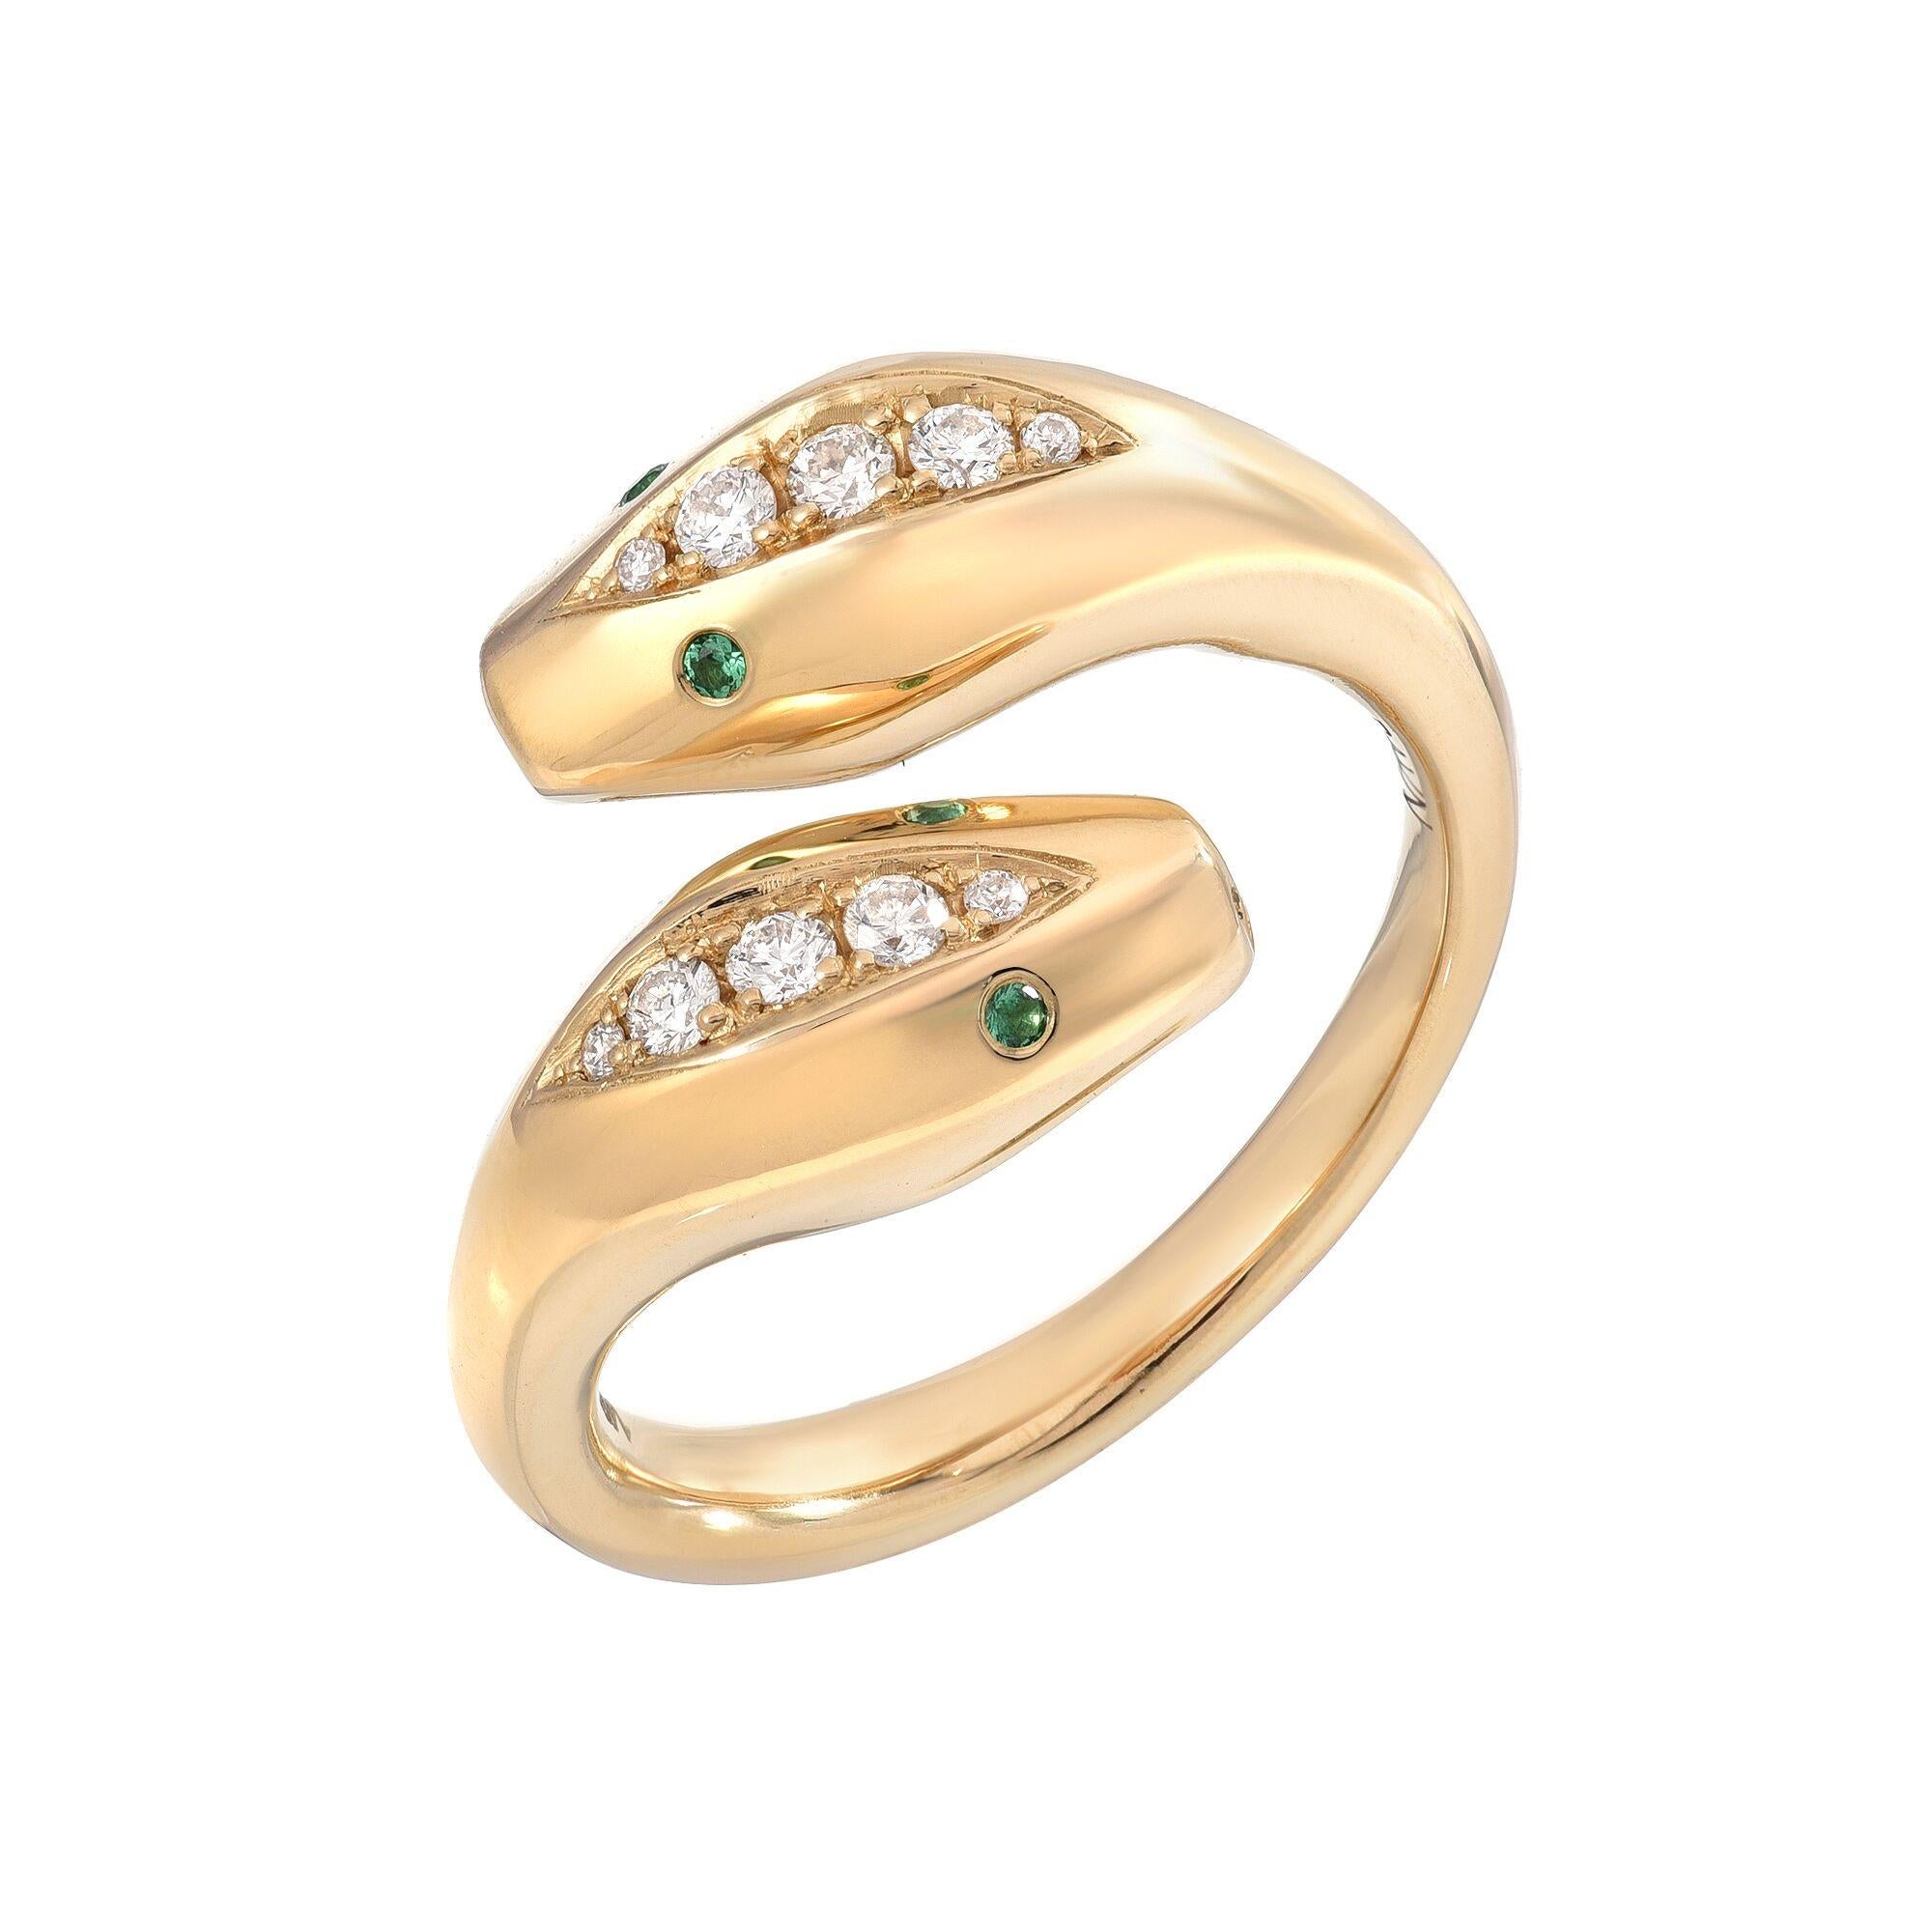 Round Cut House of RAVN, 14k Gold 2 Headed Serpent Wrap Ring w/ Emerald & Diamond details For Sale